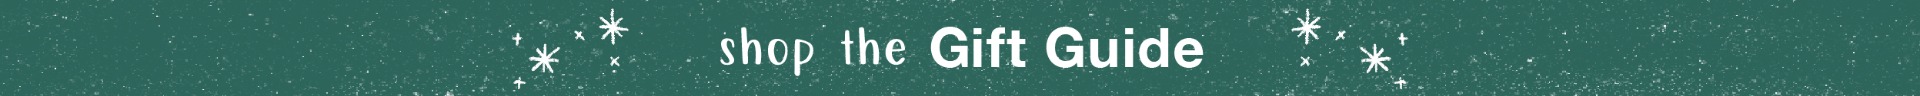 Click Here To Shop The Gift Guide